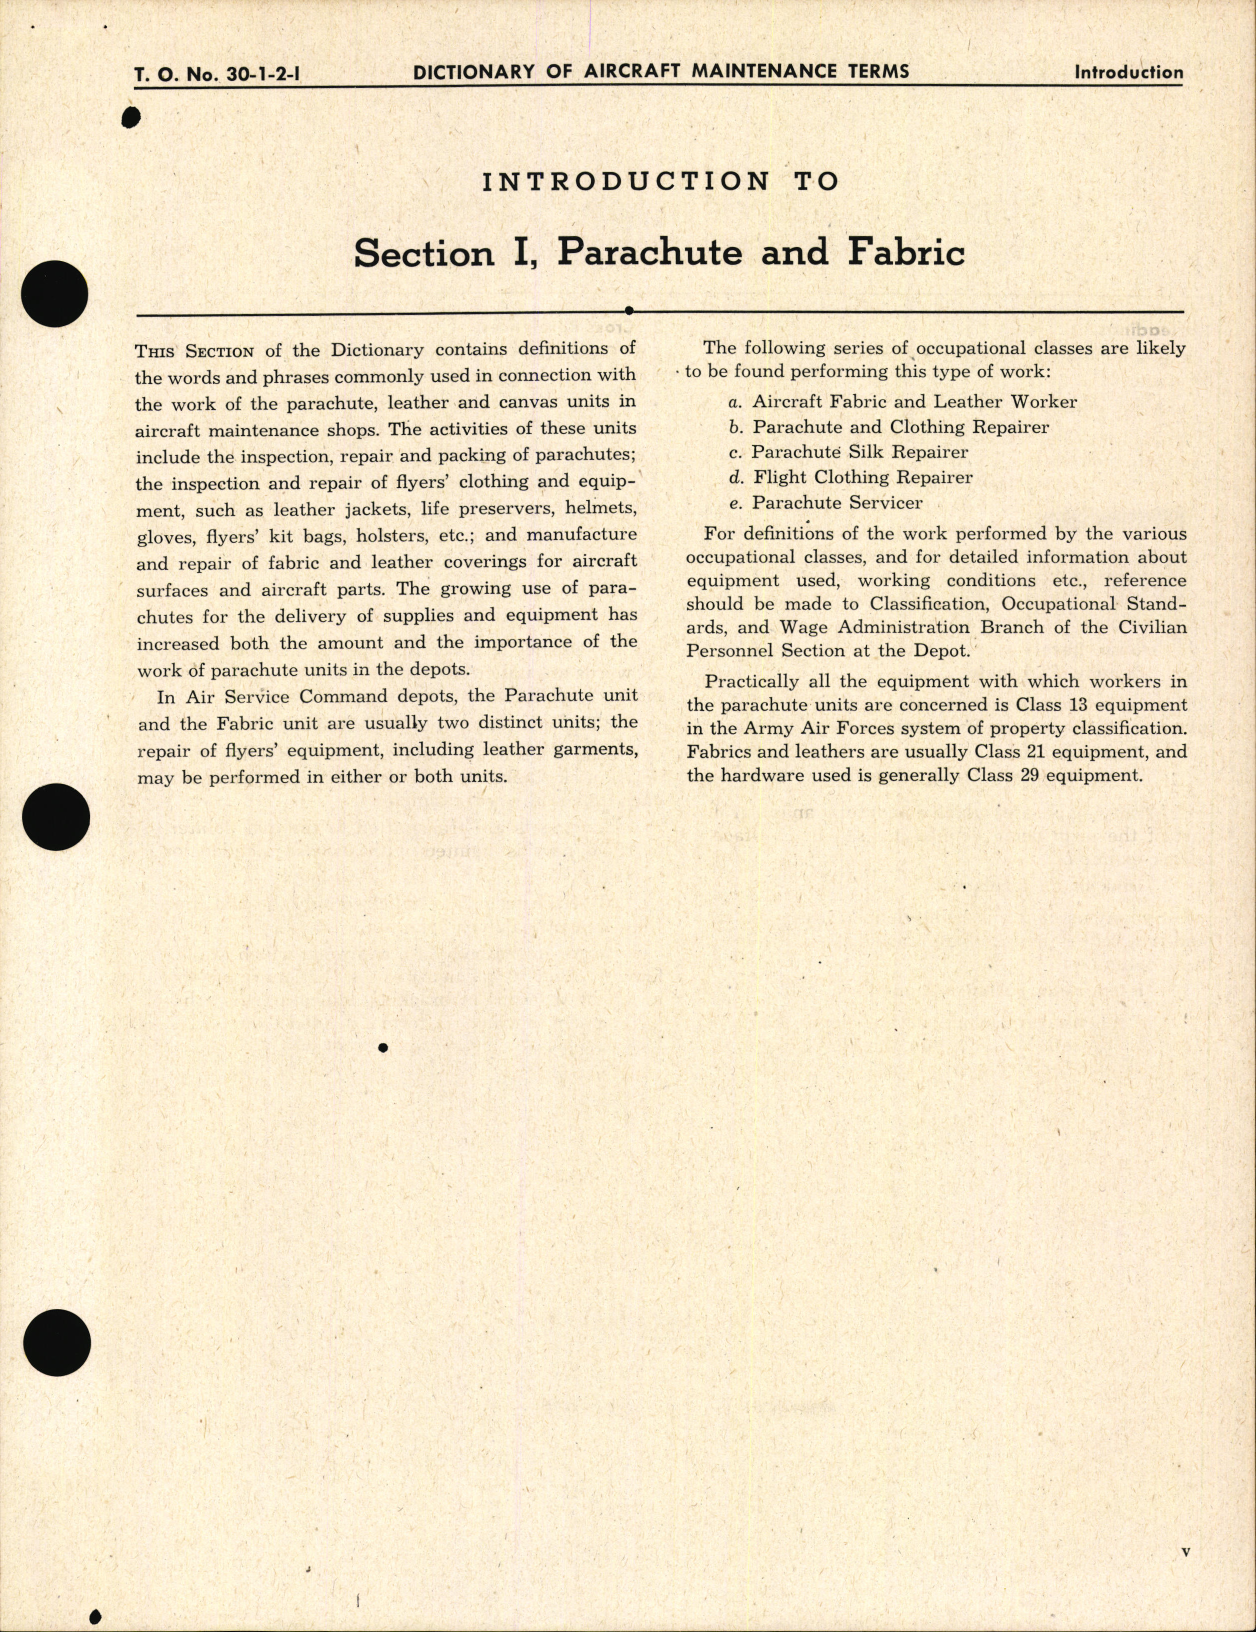 Sample page 7 from AirCorps Library document: Dictionary of Aircraft Maintenance Terms; Section I Parachute and Fabric